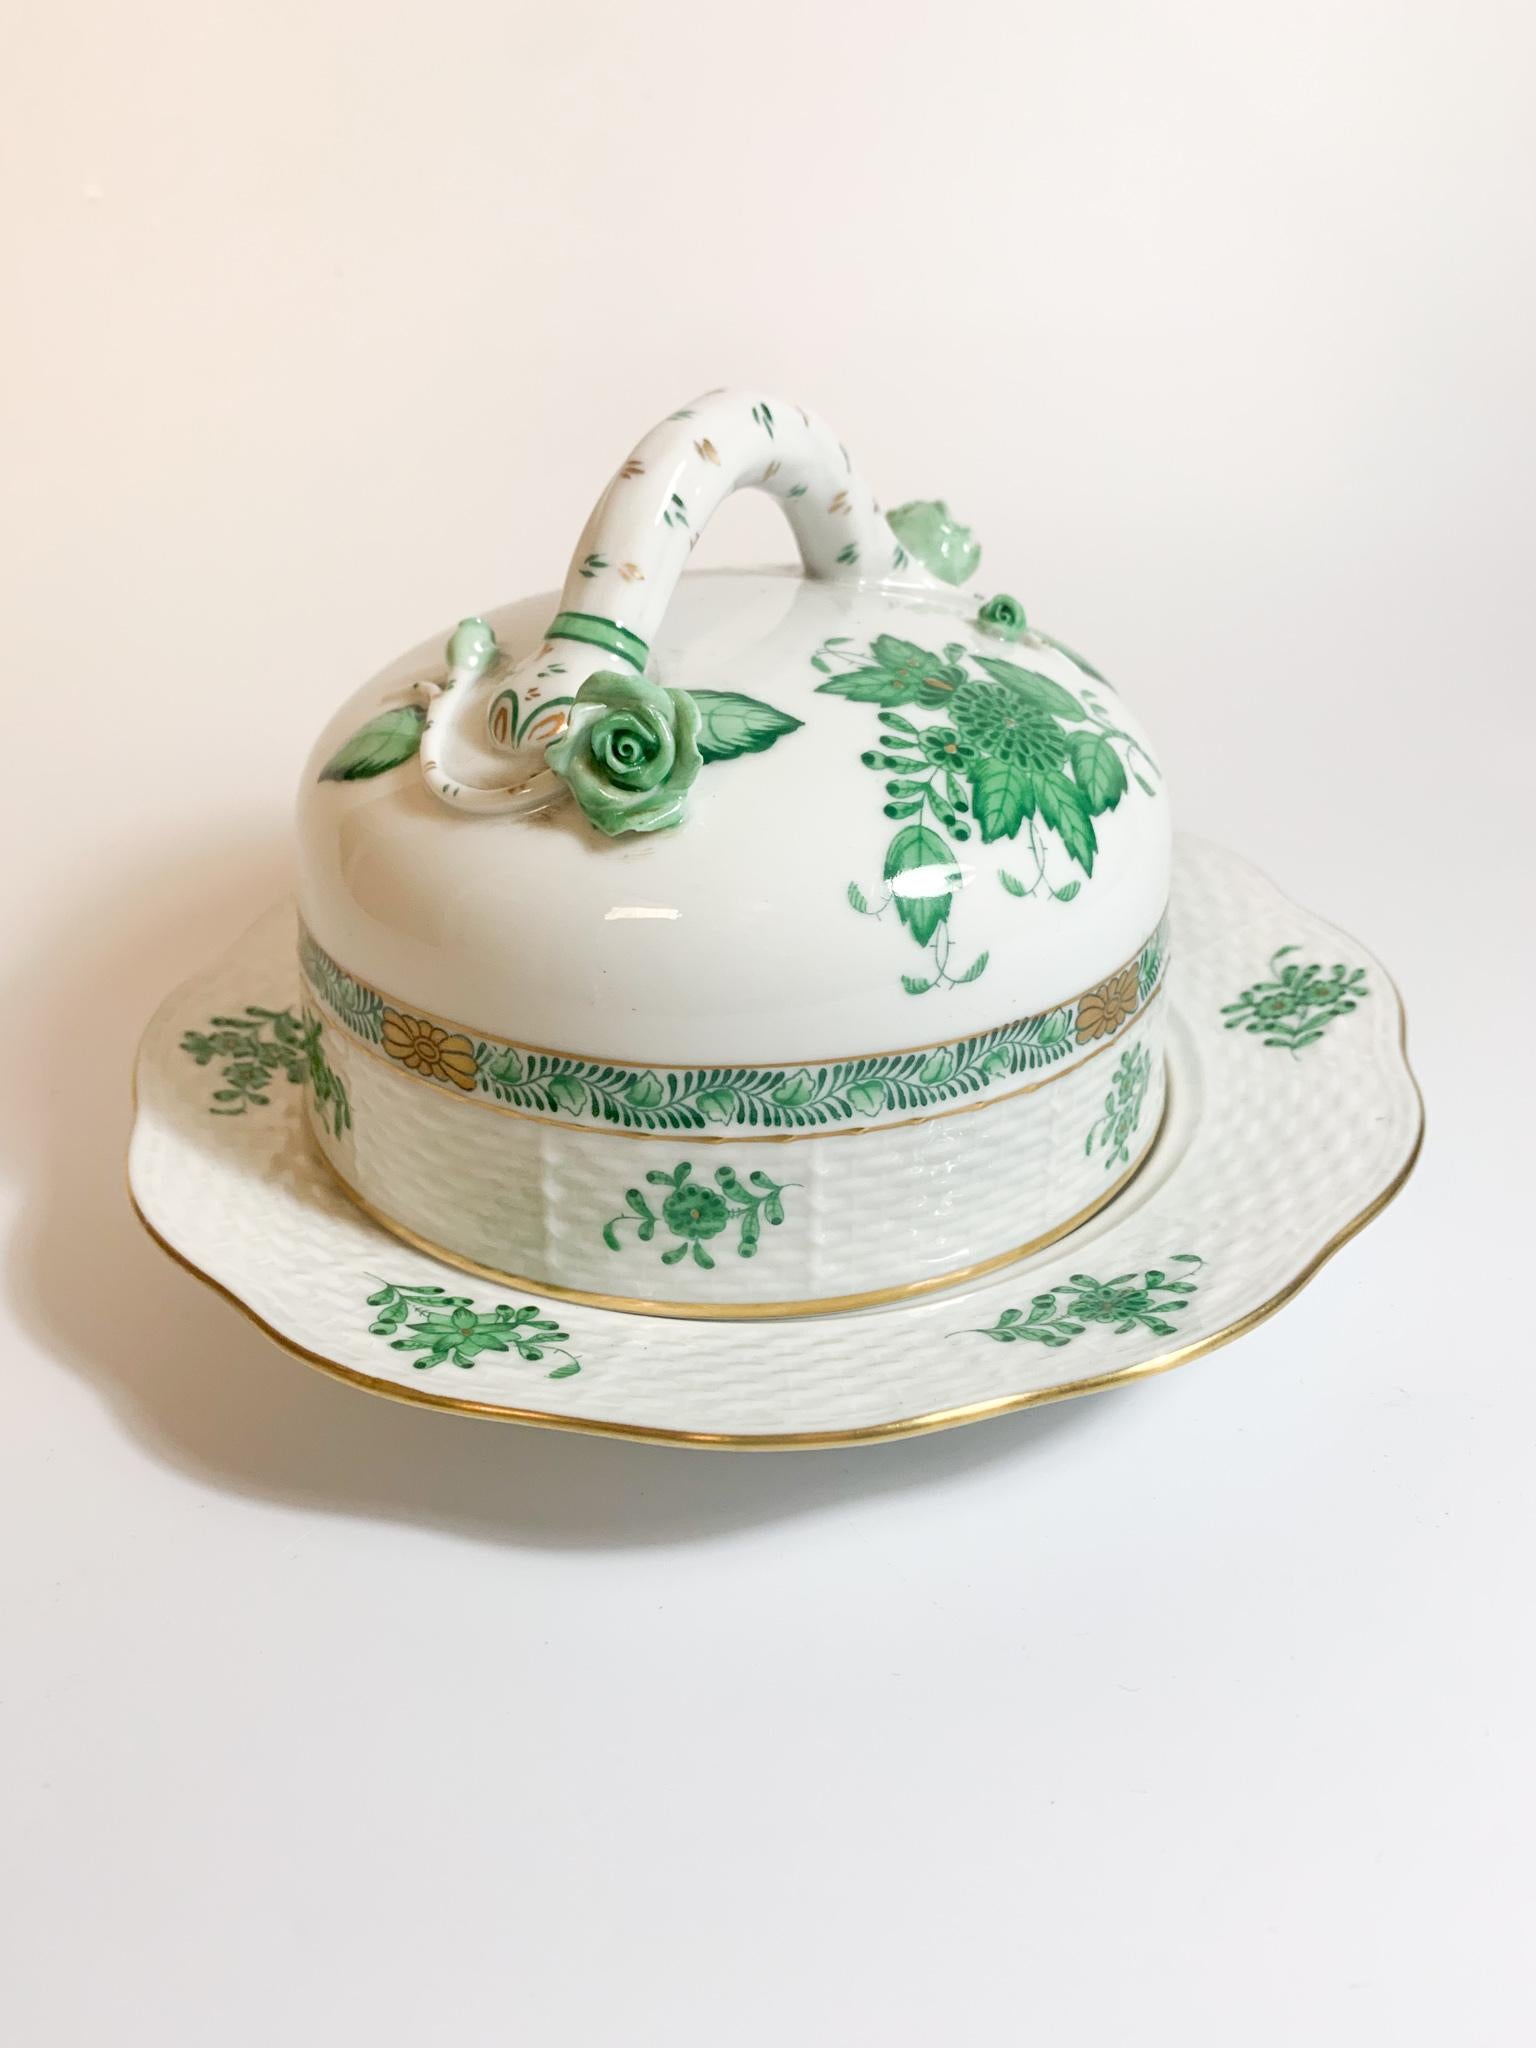 Mid-20th Century Herend Porcelain Butter Dish with Ivy Pattern from the 1950s